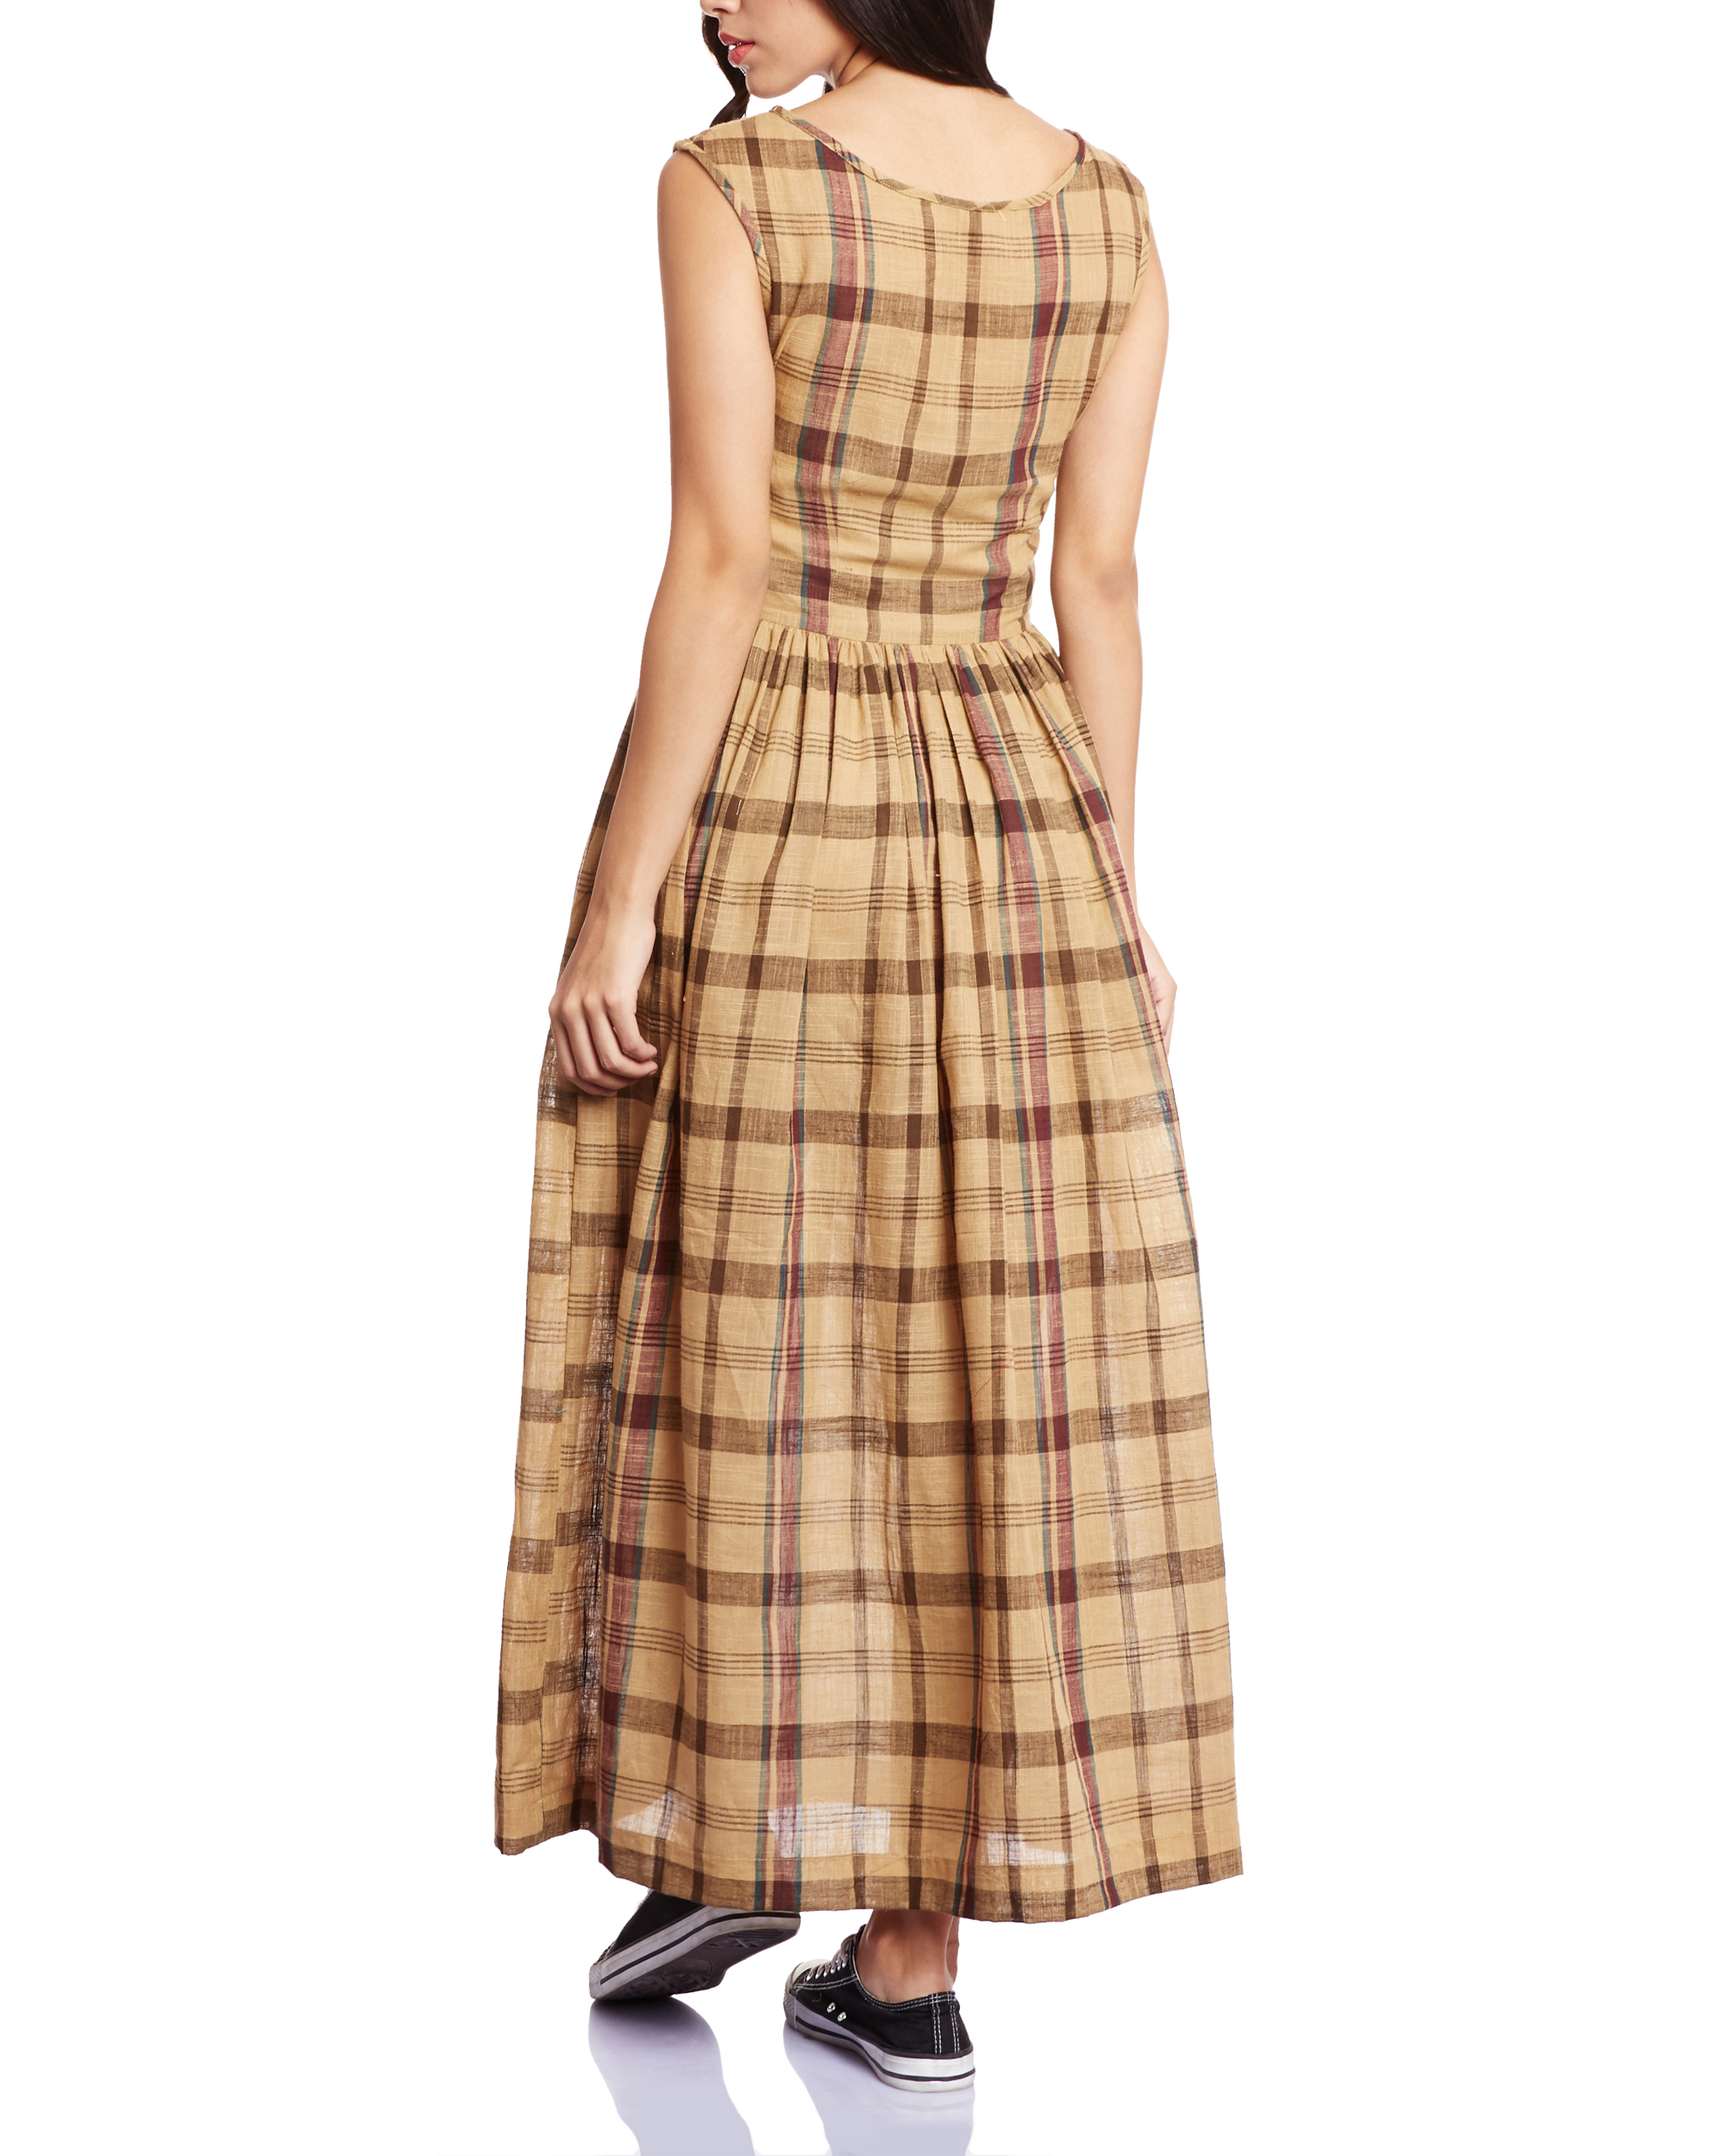 Checekred beige pleated maxi by Bhava | The Secret Label